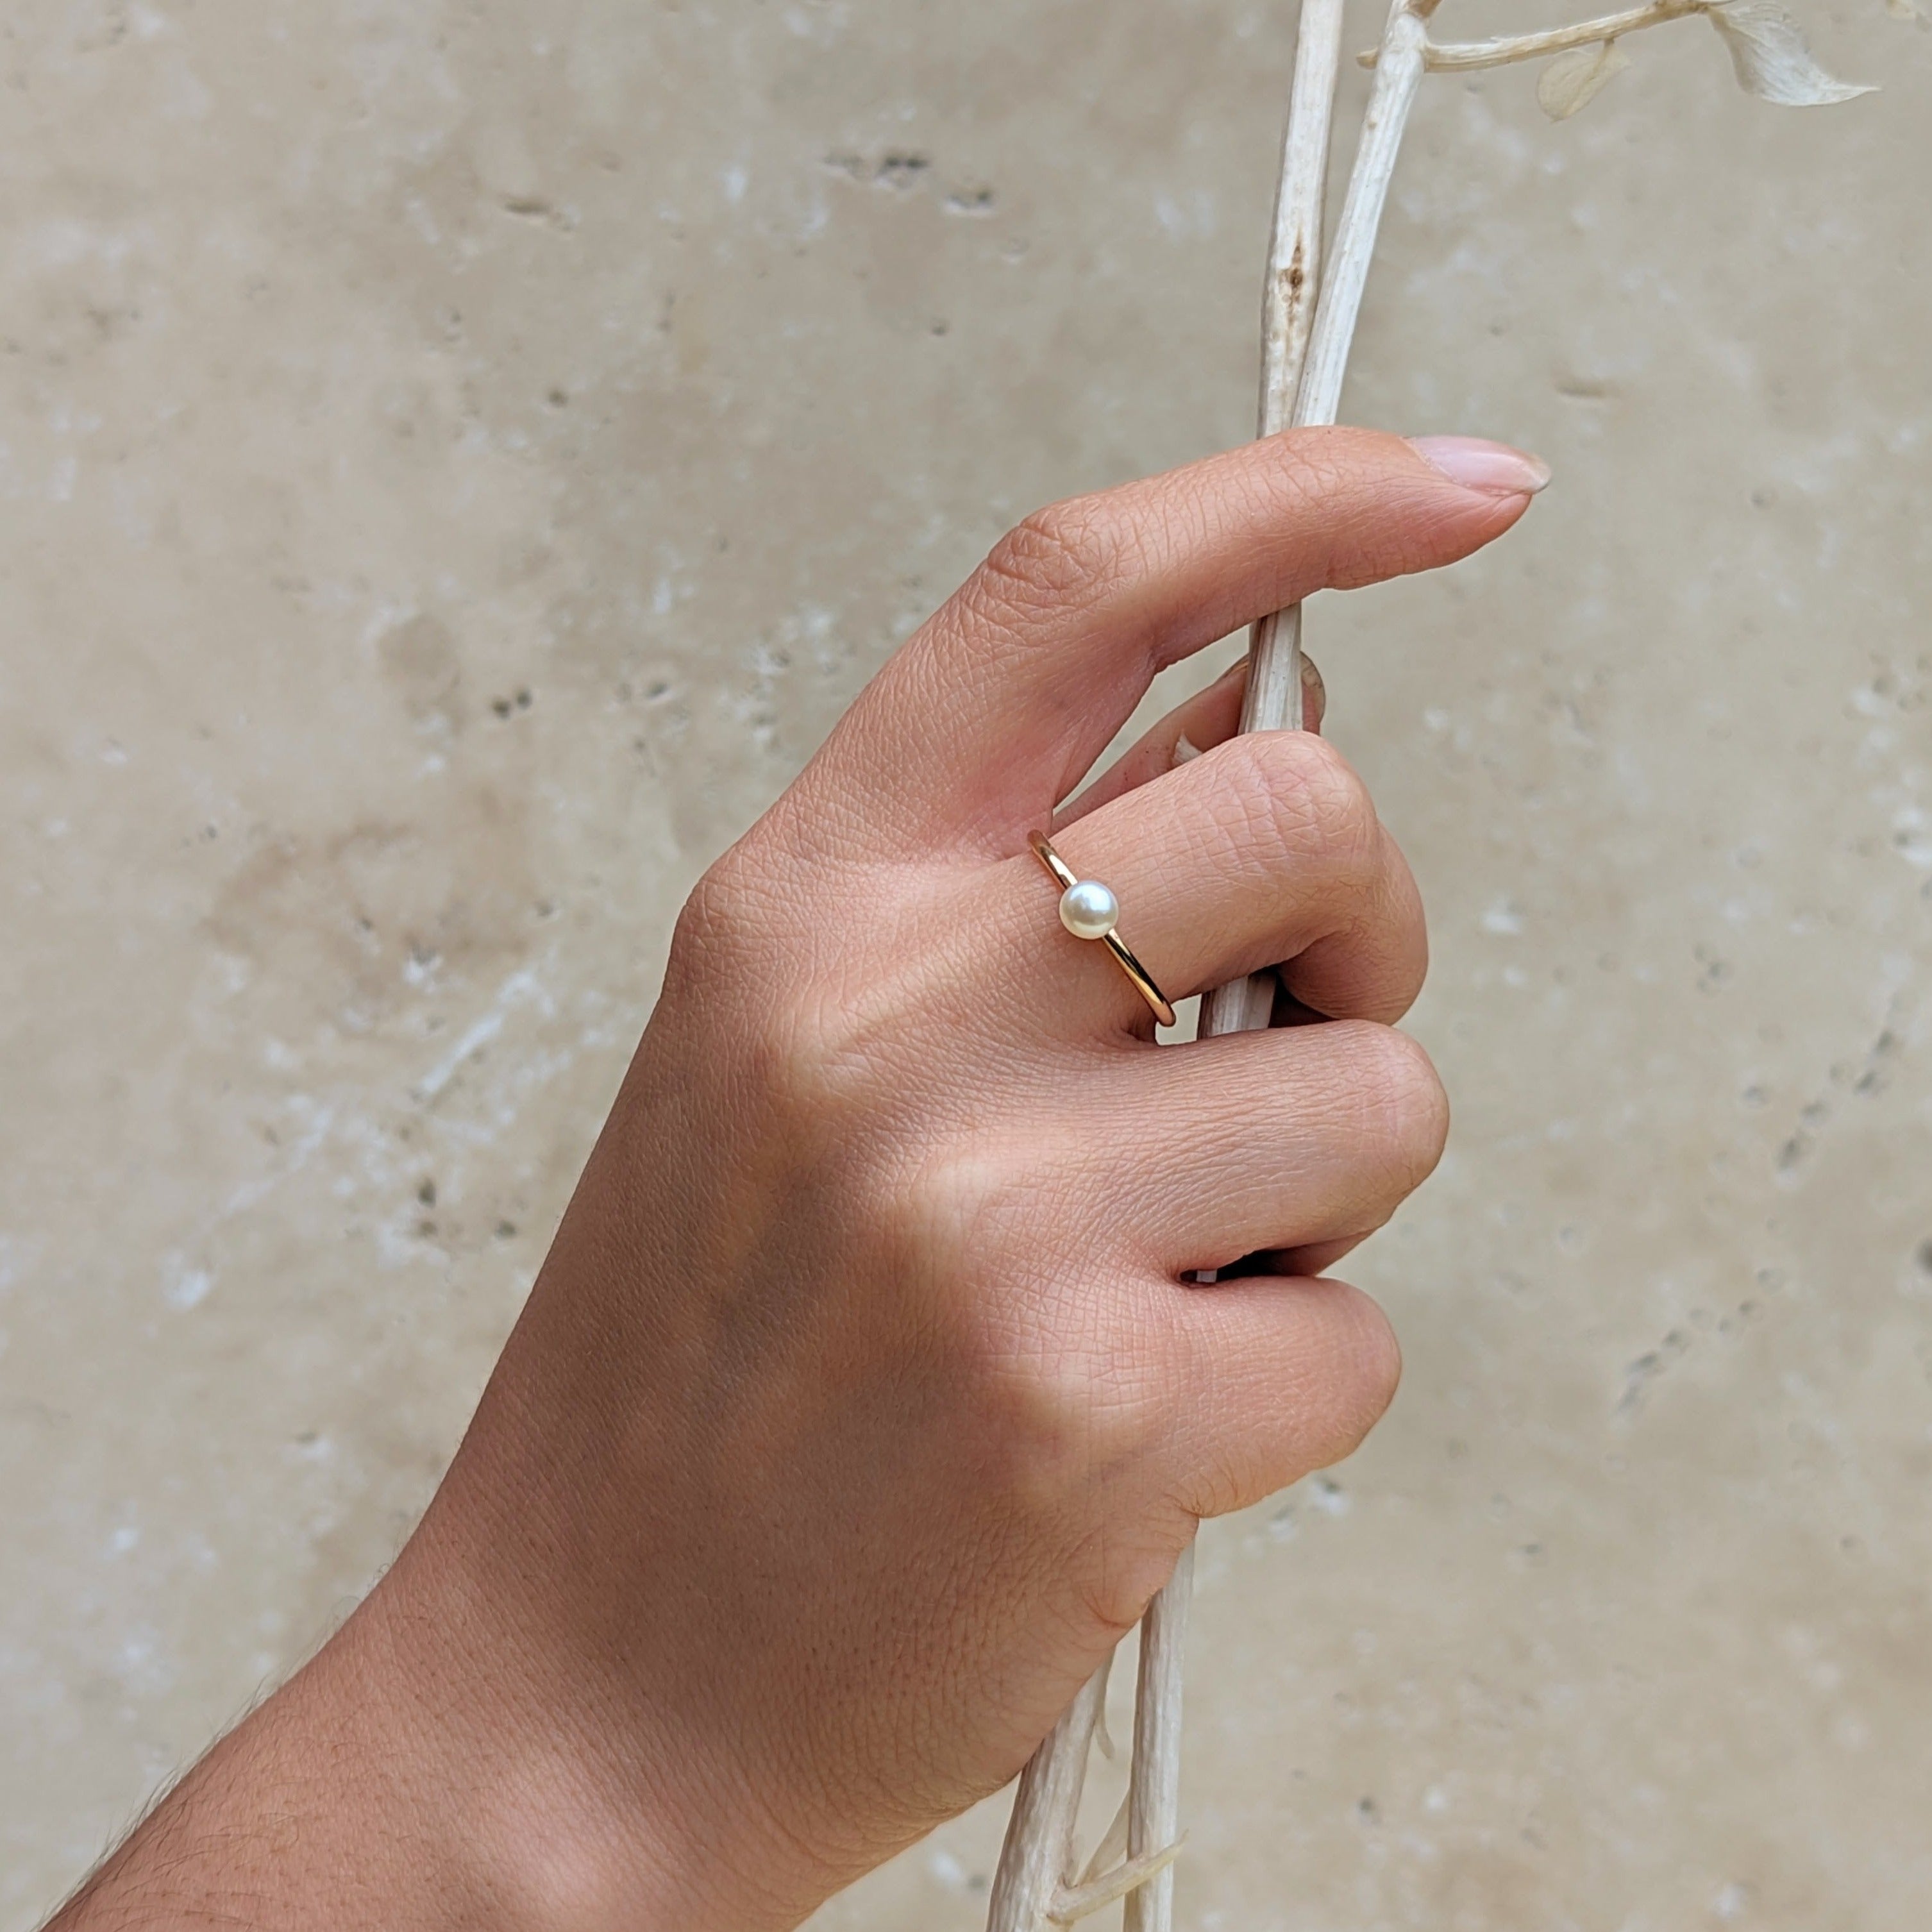 Hand holding a dried branch wearing a gold ring with a small round pearl